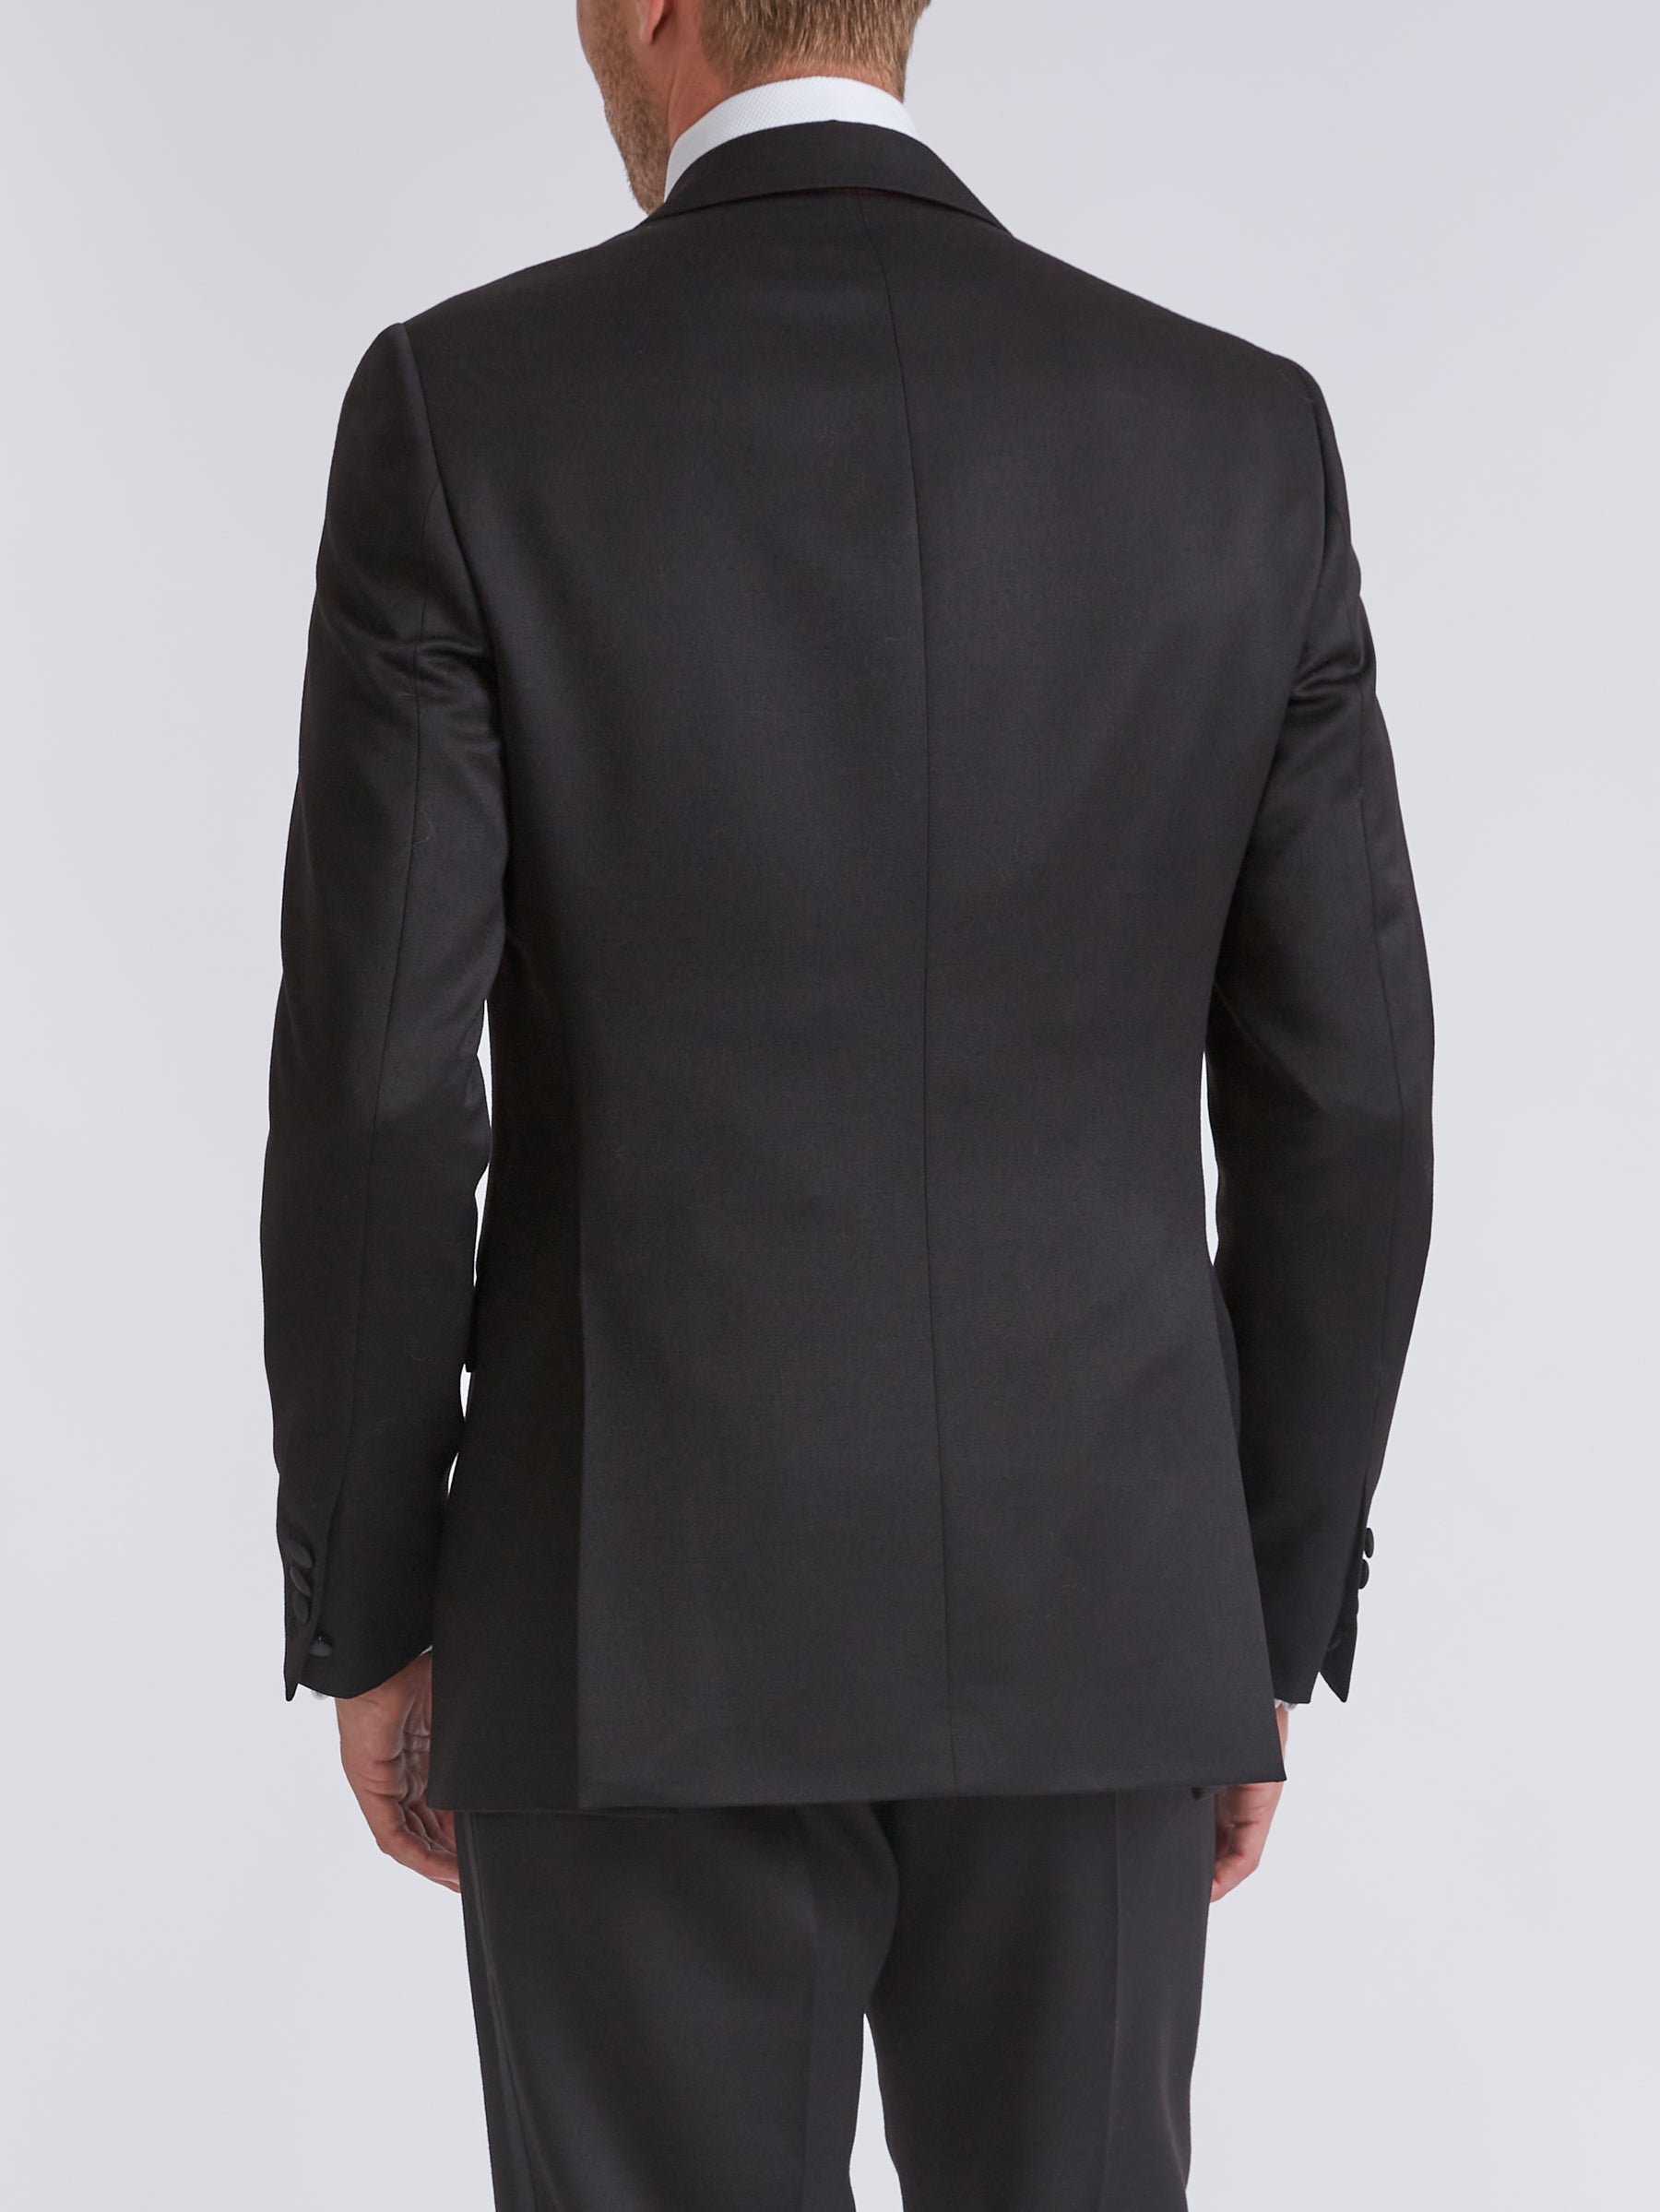 Dinner Jacket or the Tuxedo Jacket? Well both actually... – Favourbrook